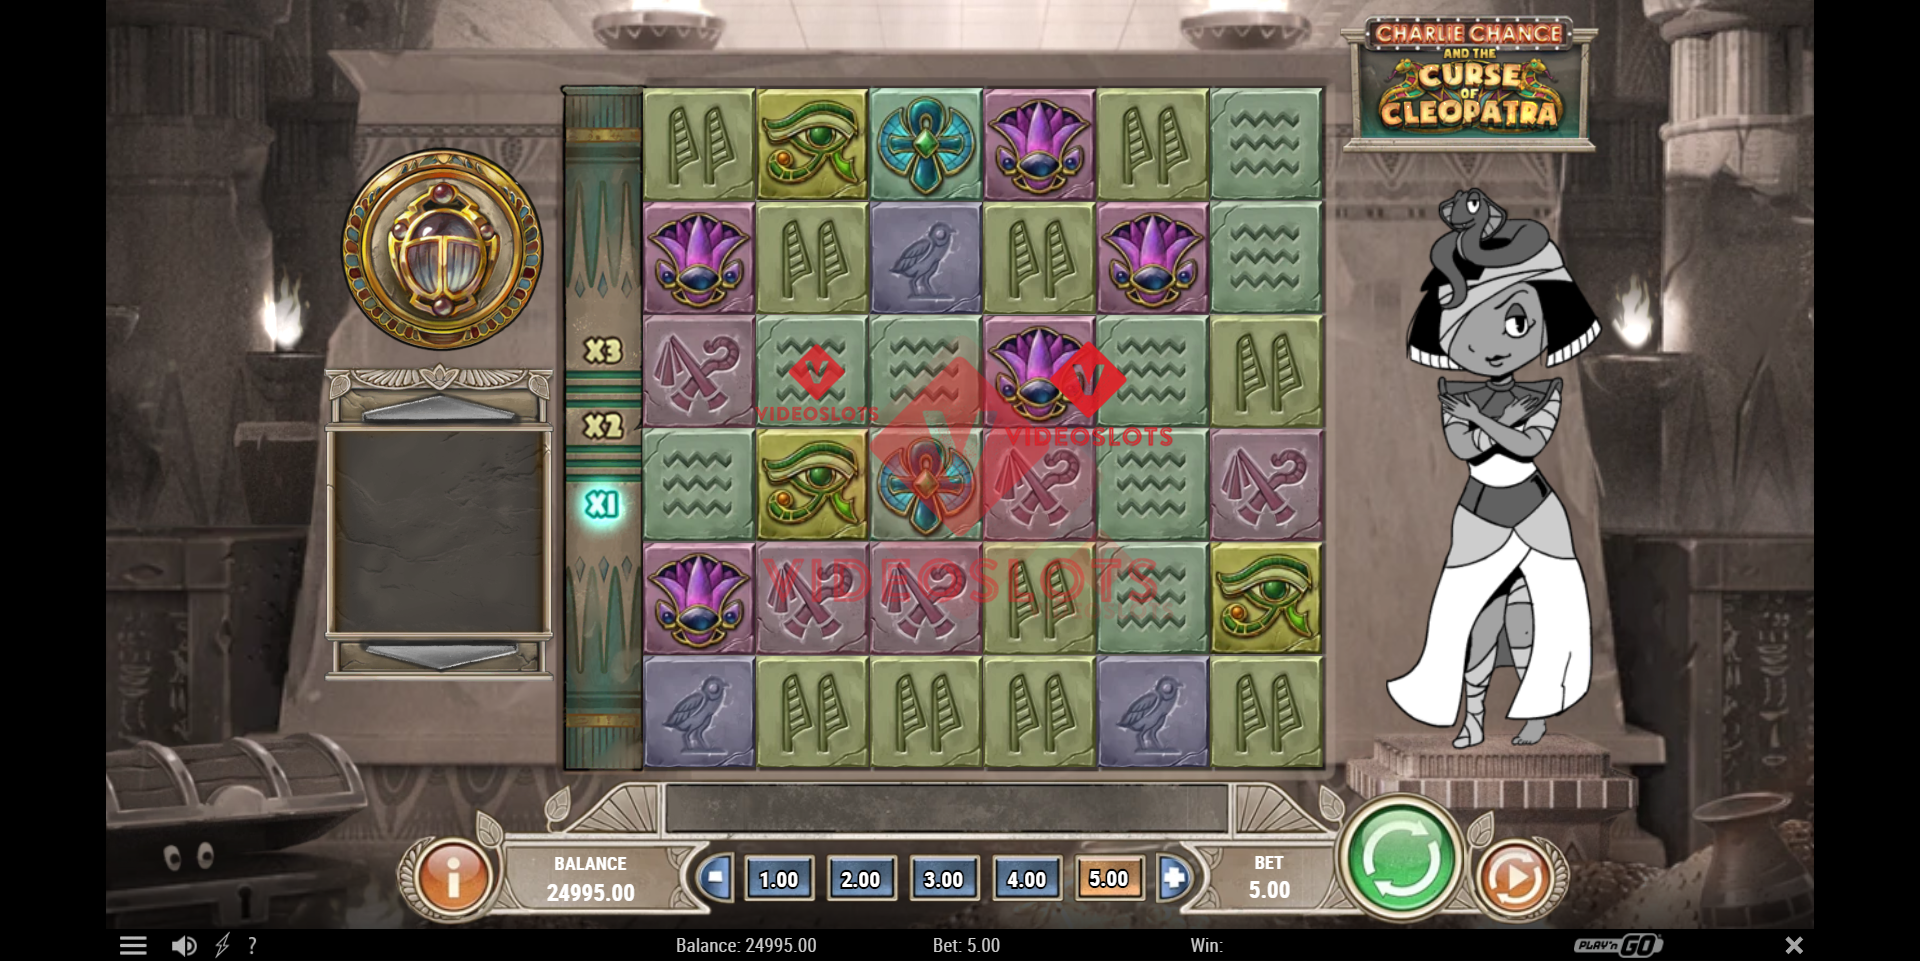 Base Game for Charlie Chance and the Curse of Cleopatra slot from Play'n Go